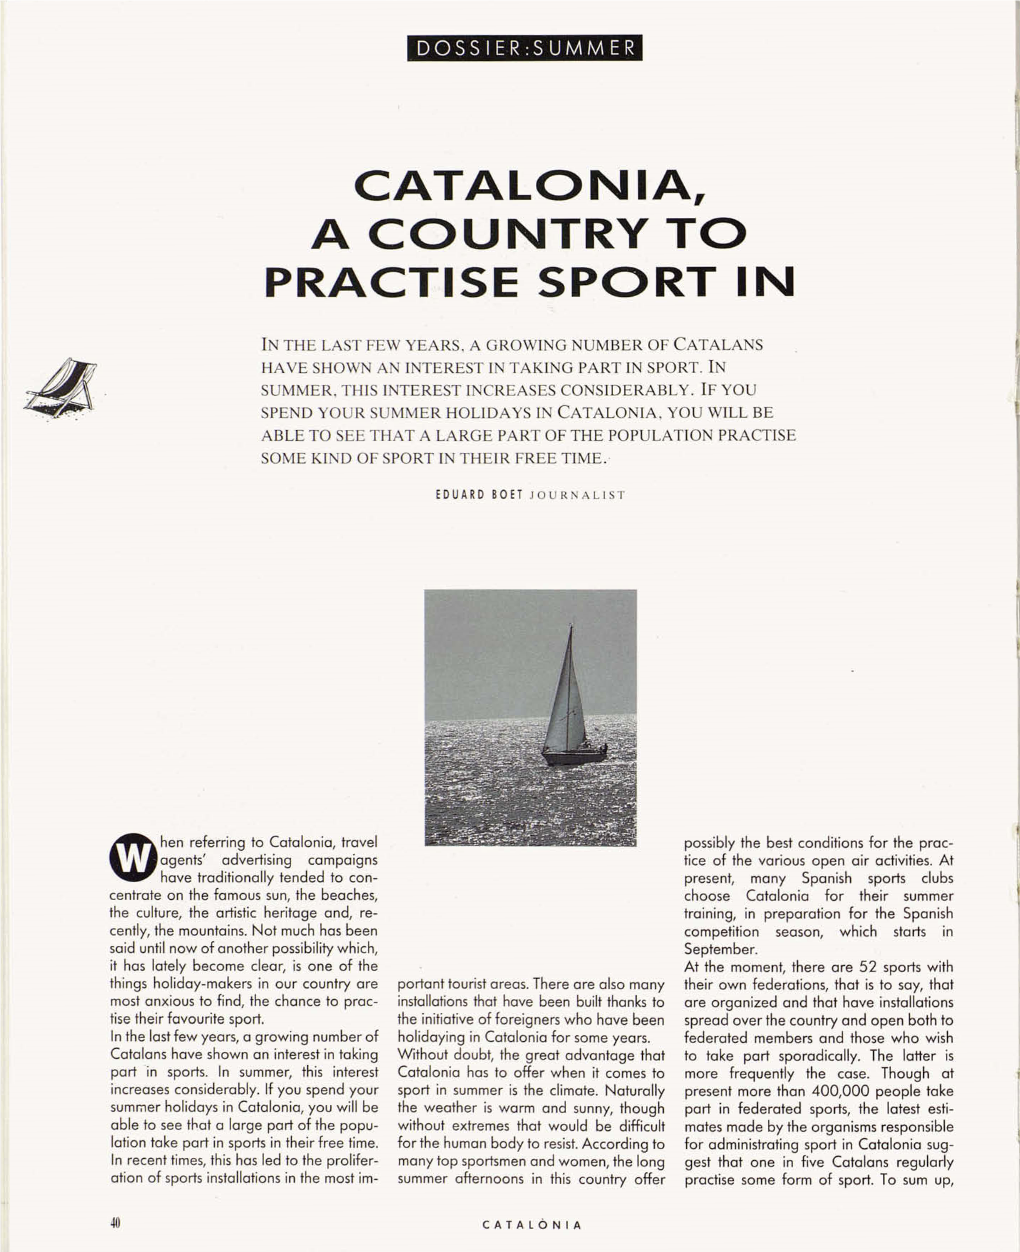 Catalonia, a Country to Practise Sport In